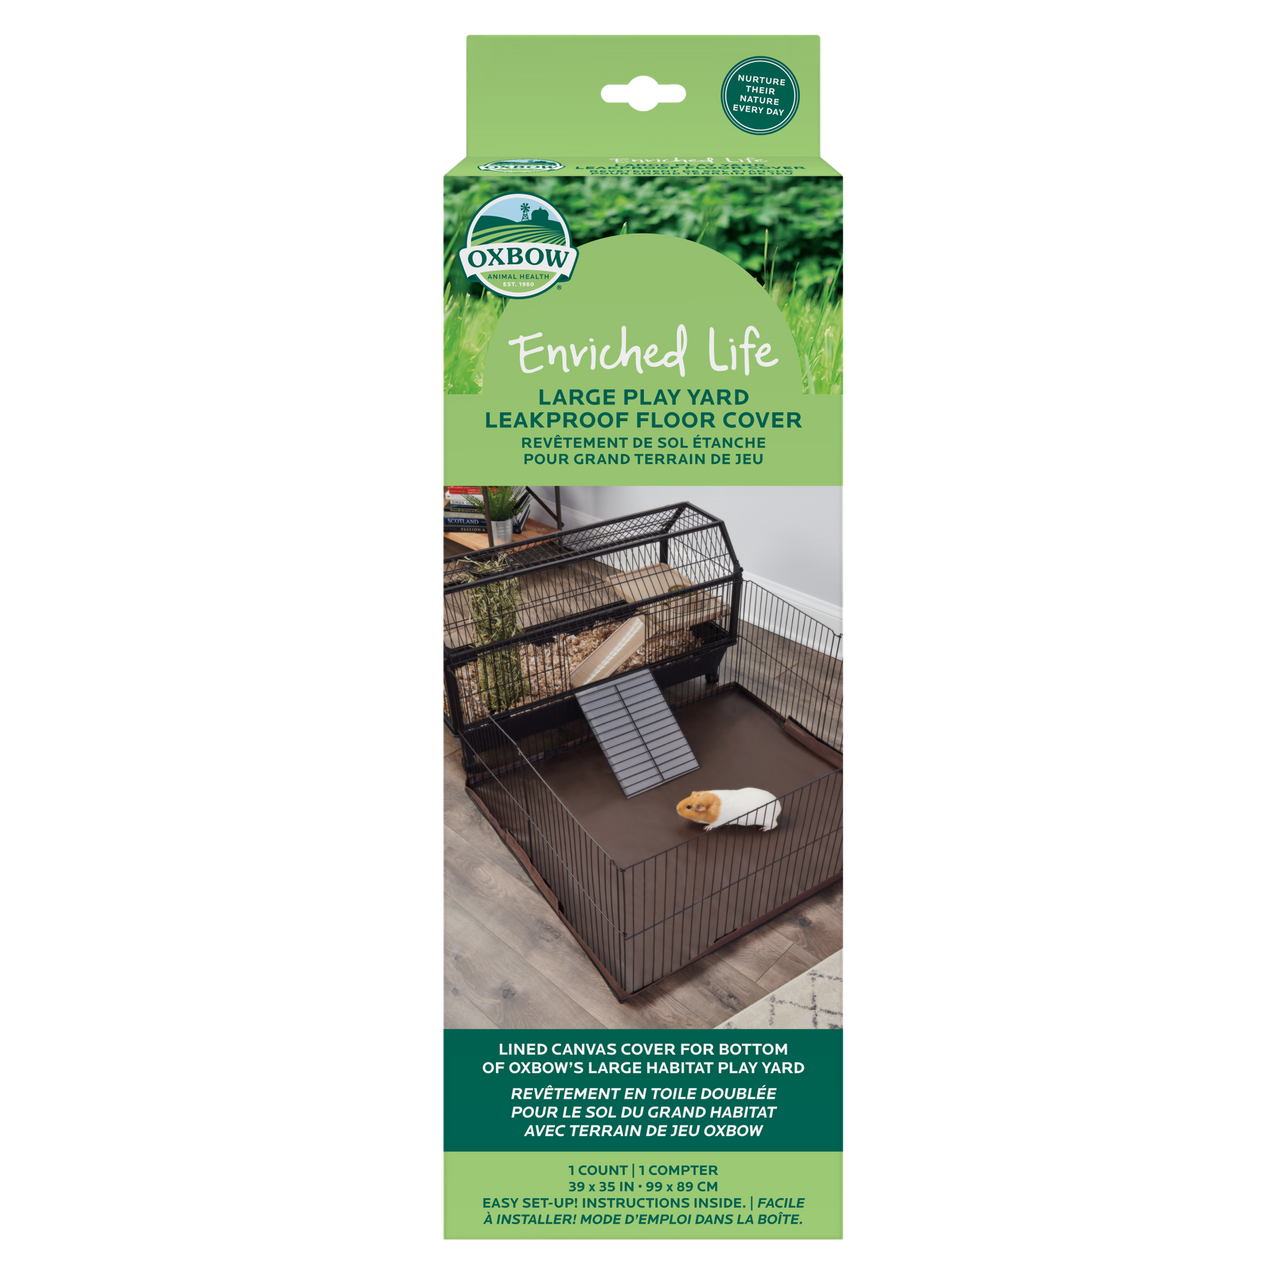 Oxbow Animal Health Enriched Life Leakproof Play Yard Floor Cover LG